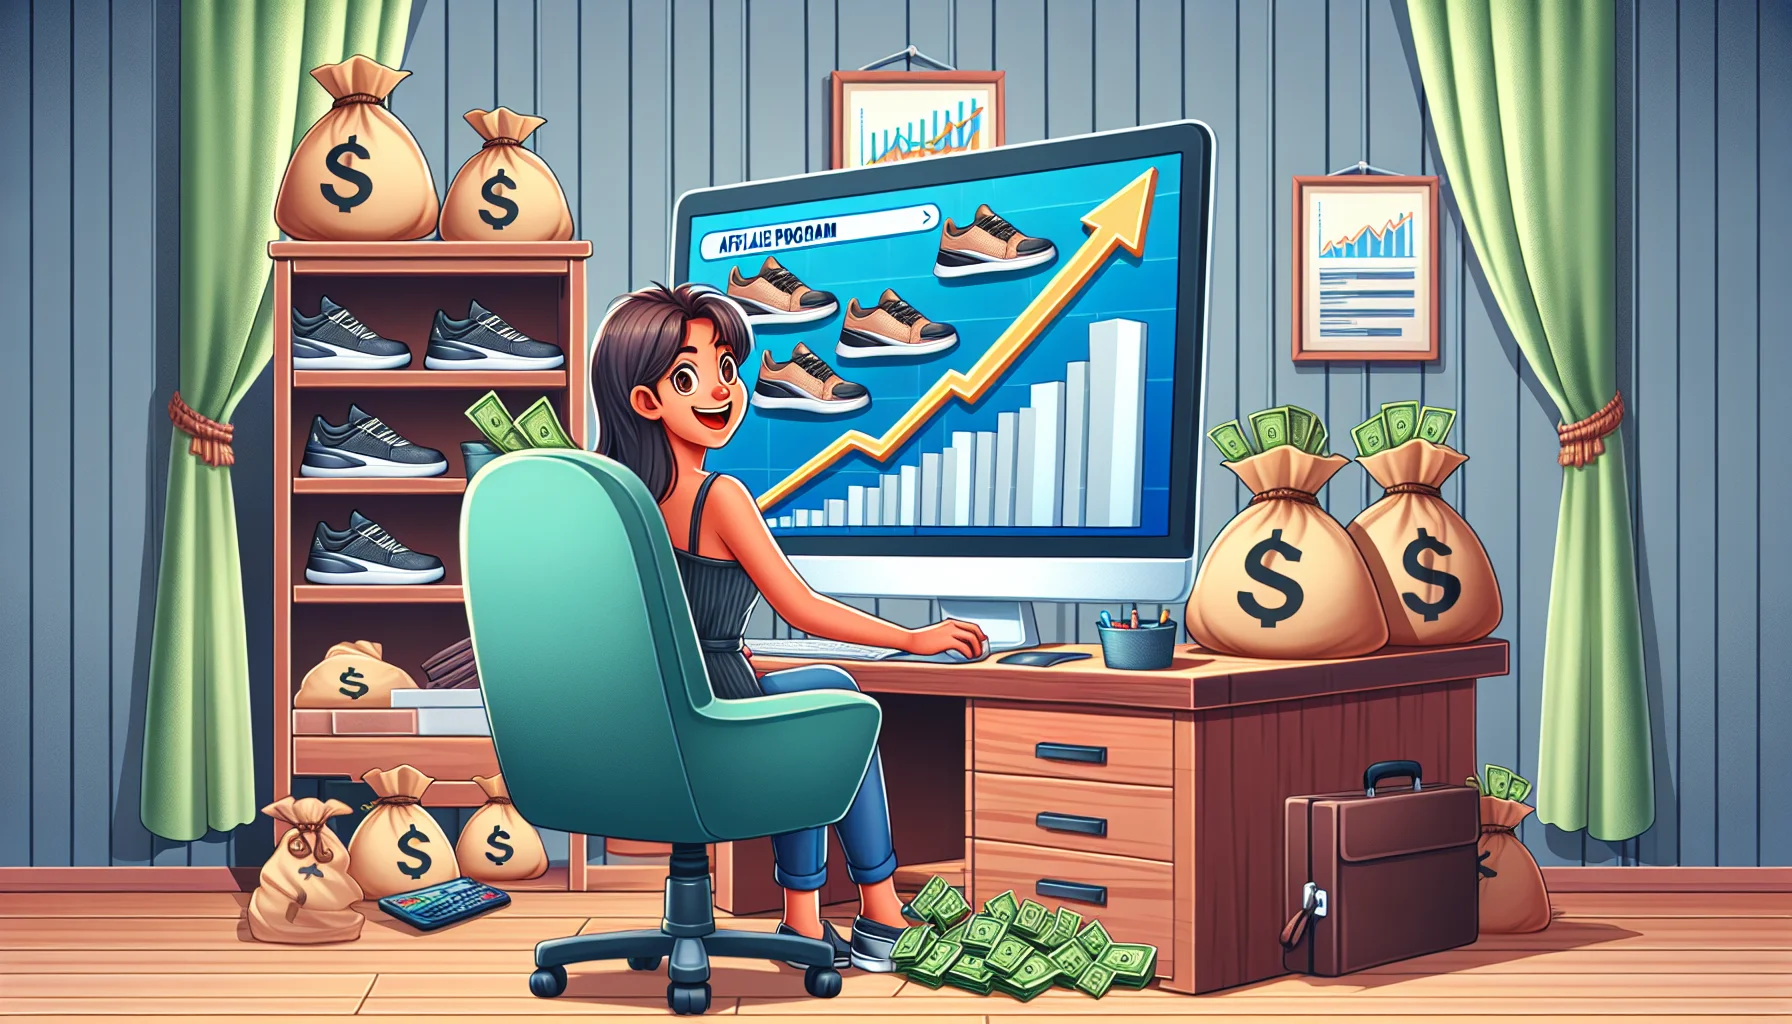 Illustrate an amusing and realistic scene associated with an unbranded shoe brand's affiliate program, specifically relating to earning money over the internet. This could involve a person sitting at a comfortable home-office with a large computer screen, where the screen is displaying rising graphs and shoe icons. Perhaps bags of money are subtly incorporated into the room's decor, making the many available opportunities exciting. This person could be a young South Asian female, enthusiastically multitasking between managing the affiliate network's algorithms and interacting with clients through virtual meetings.